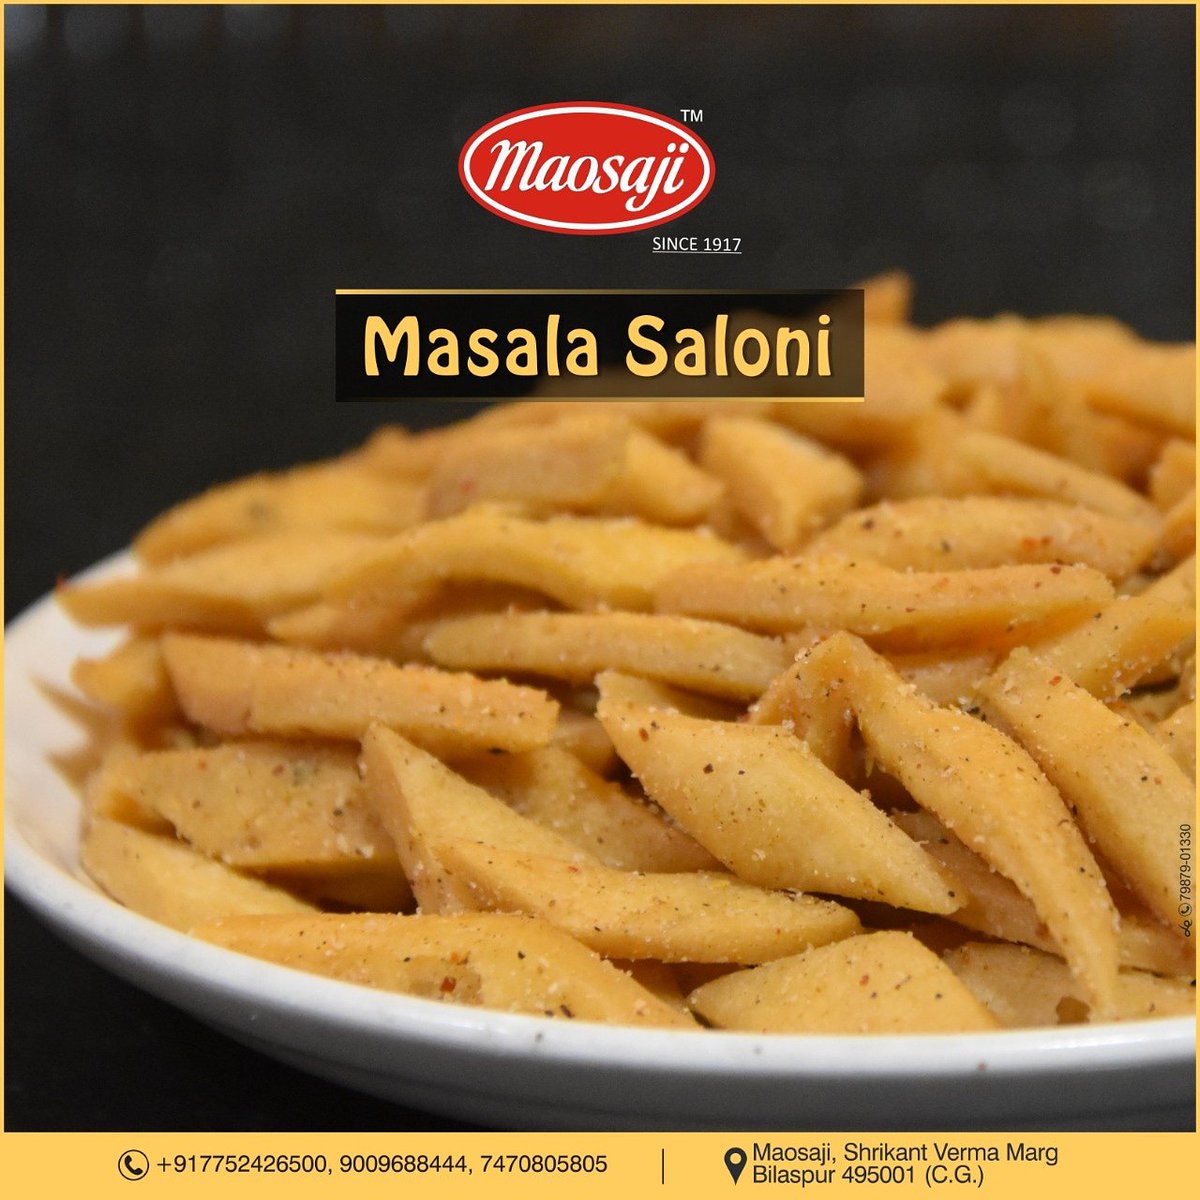 Add this #Menu on your #festiveday #special. Enjoy the #crispy and #crunchy #MasalaSaloni from #MaosajiSweets.

Make your #festiveseason special with all #festiveitems of maosaji sweets.
Order Now!
#ContactUs: 90096-88444, 74708-05805, +91 7752 426500.